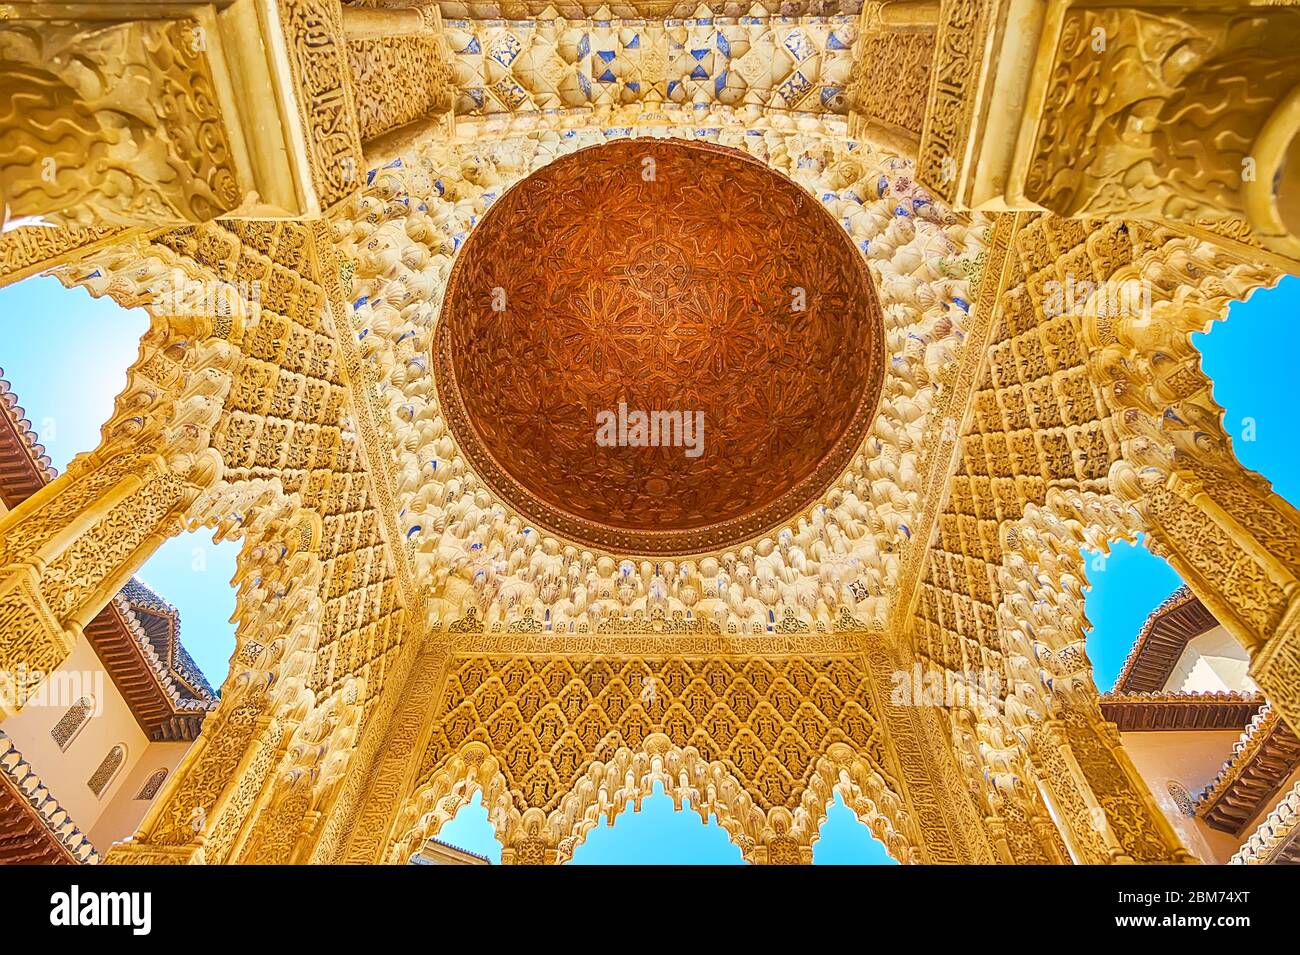 GRANADA, SPAIN - SEPTEMBER 25, 2019: The masterpiece Mudejar decoration of portico dome in Palace of Lions (Nasrid Palace, Alhambra) with carved woode Stock Photo